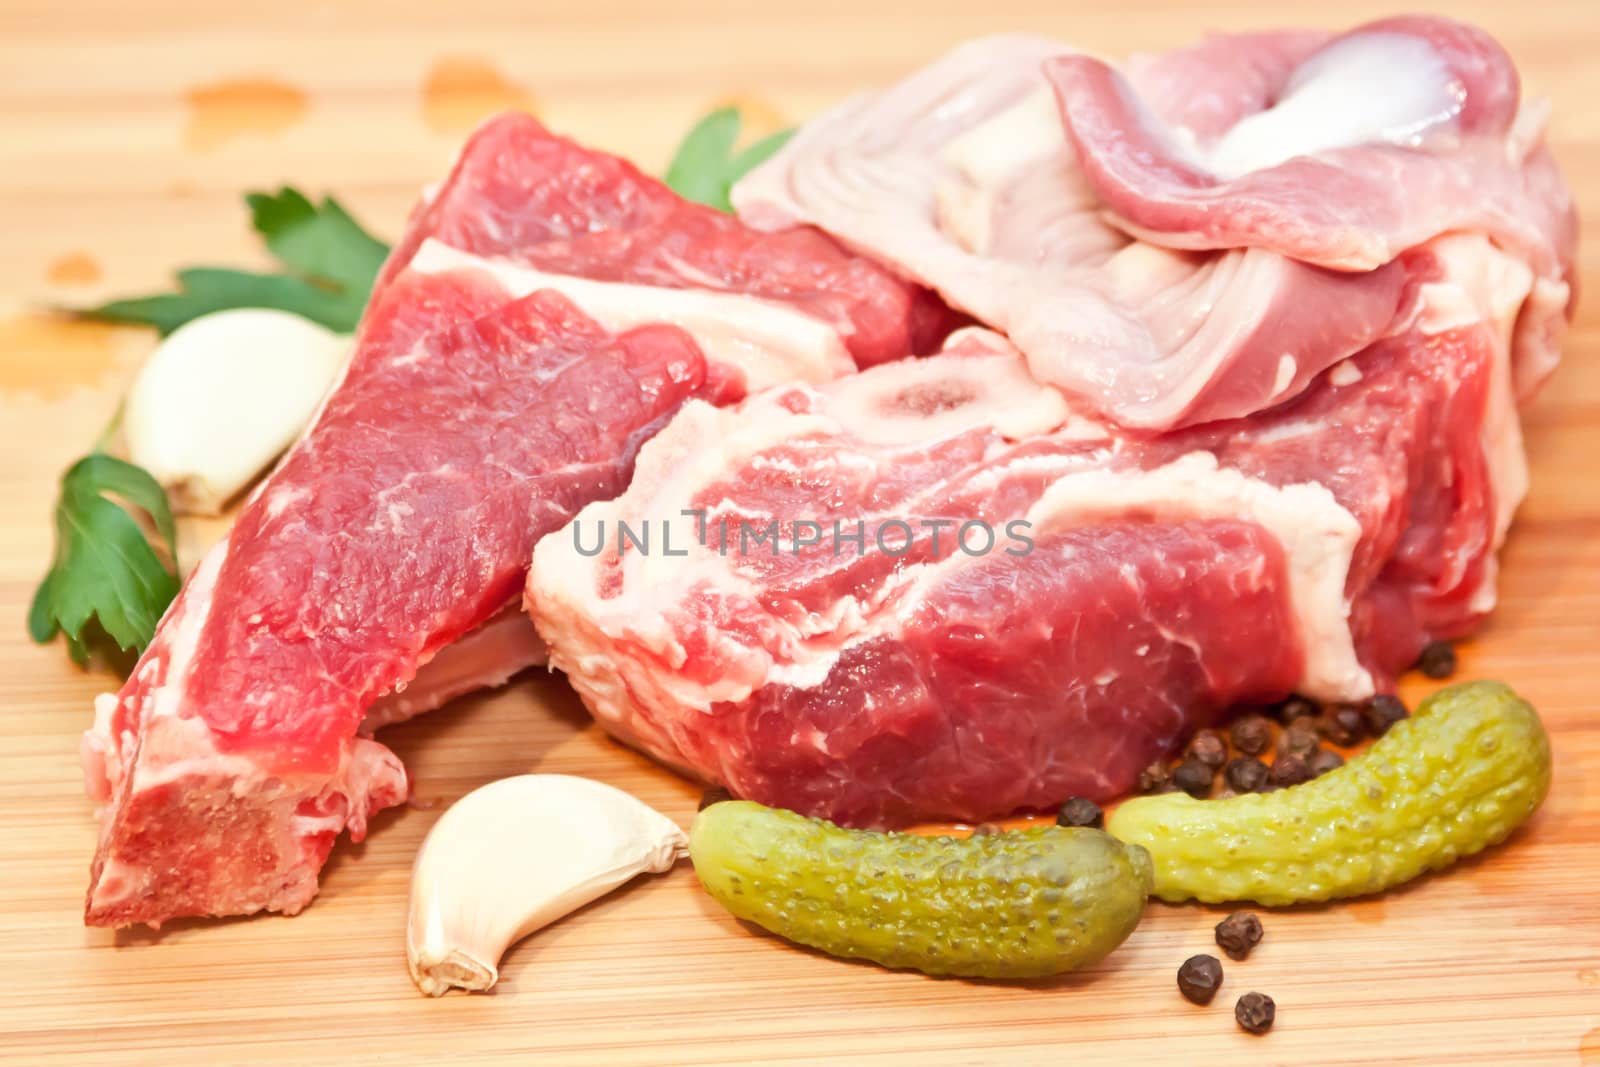 Raw beef with spices and vegetables on the cutting board
